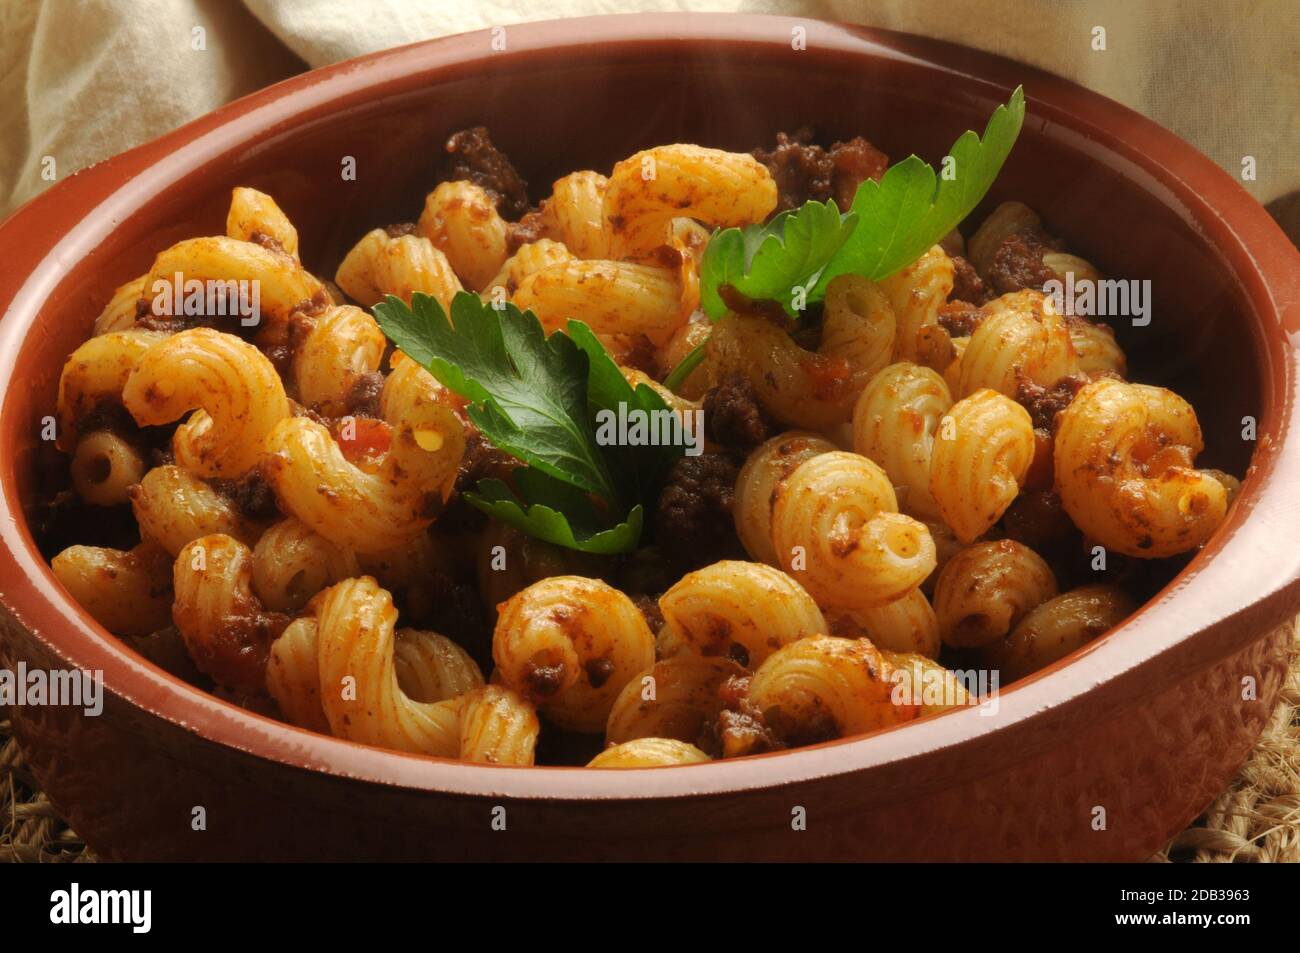 Pasta dish with meat sauce Stock Photo